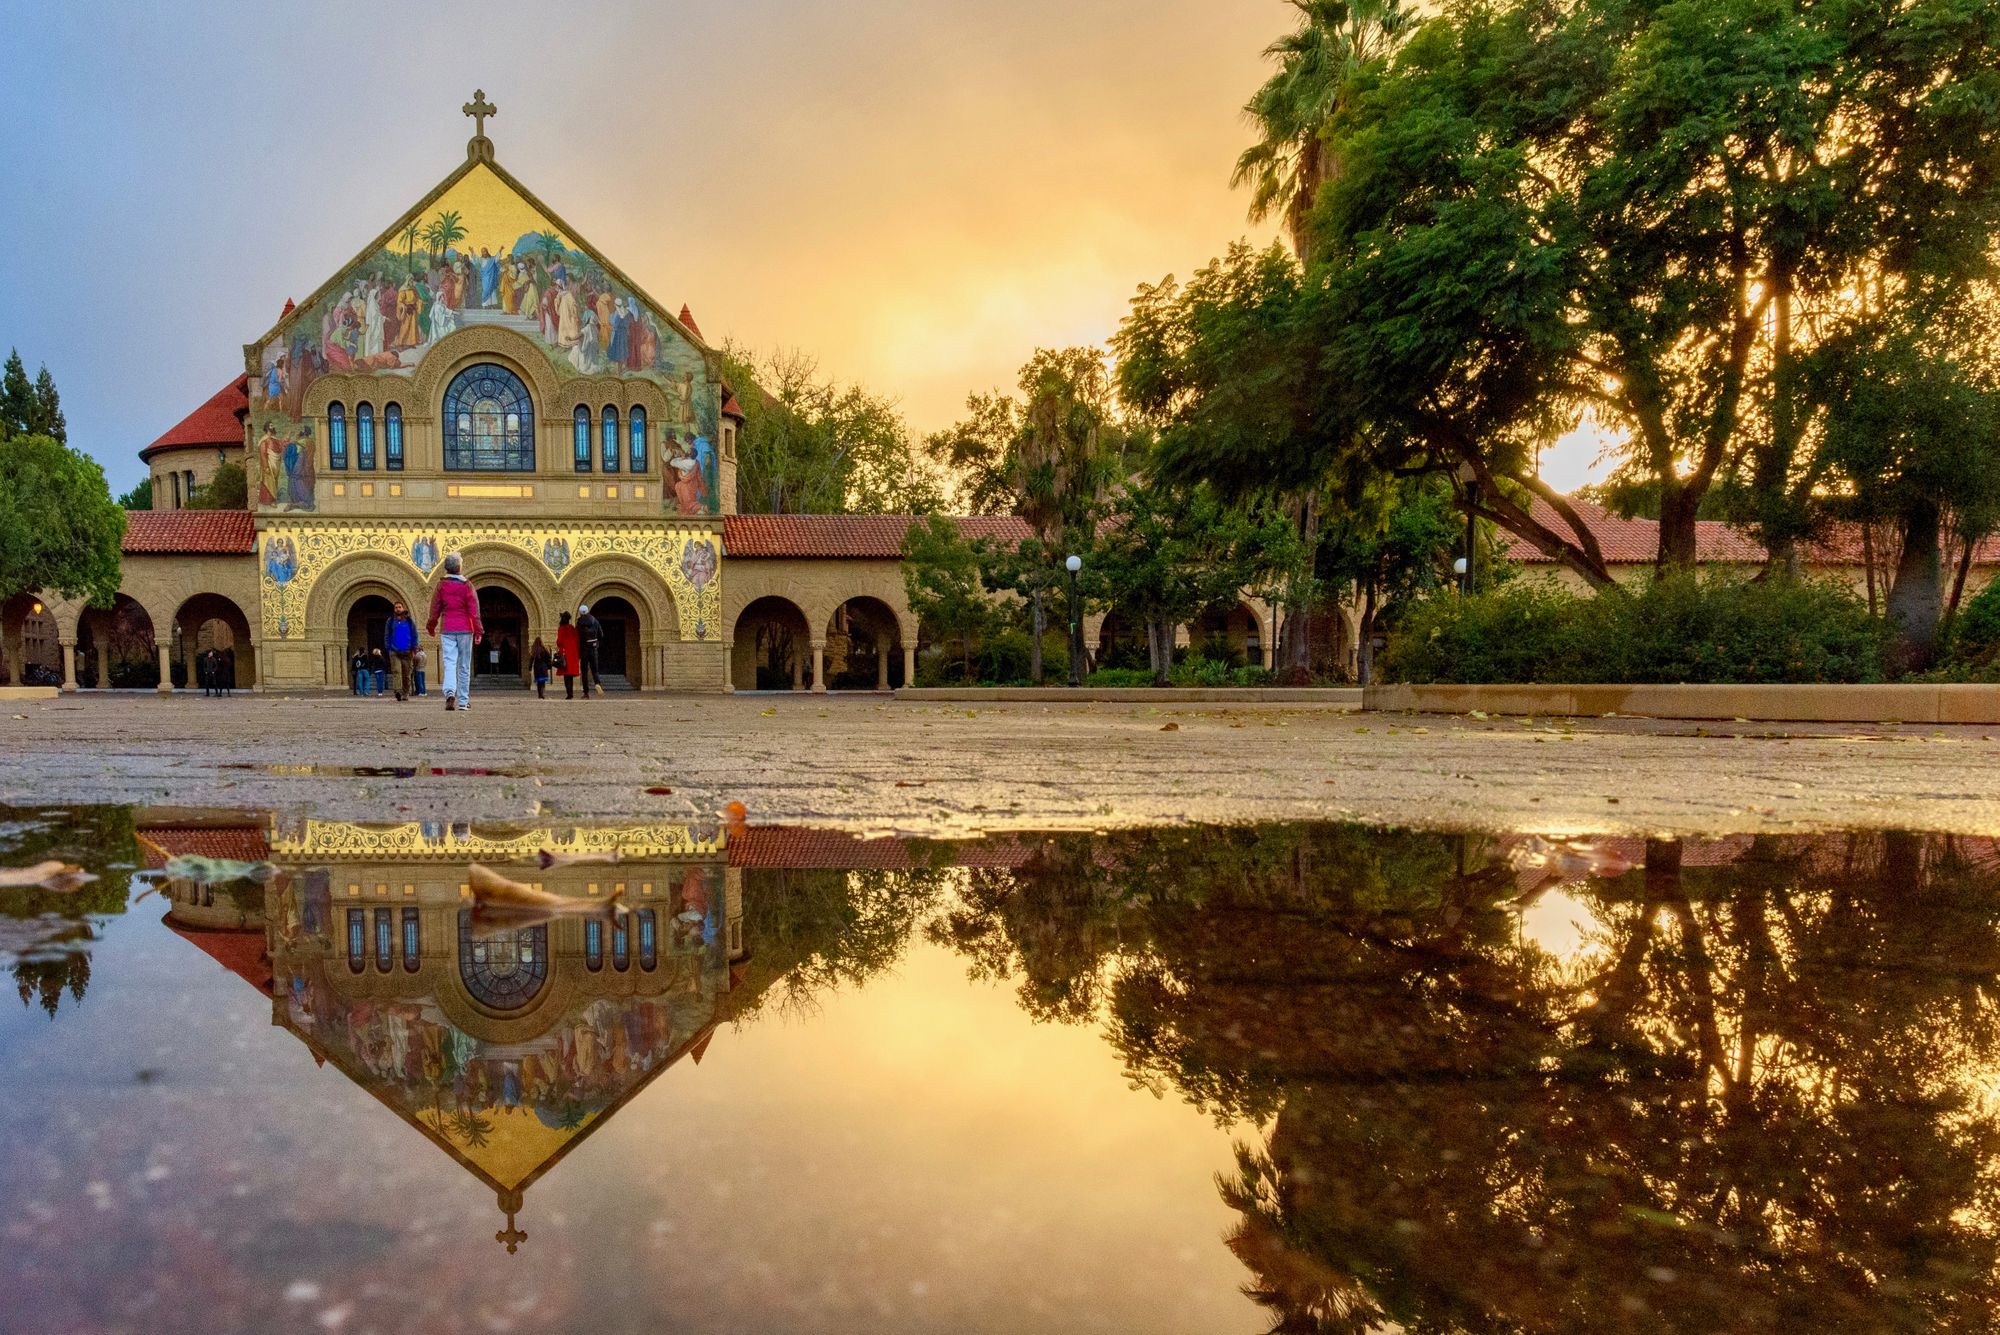 Editor's Note: The Twilight of Stanford